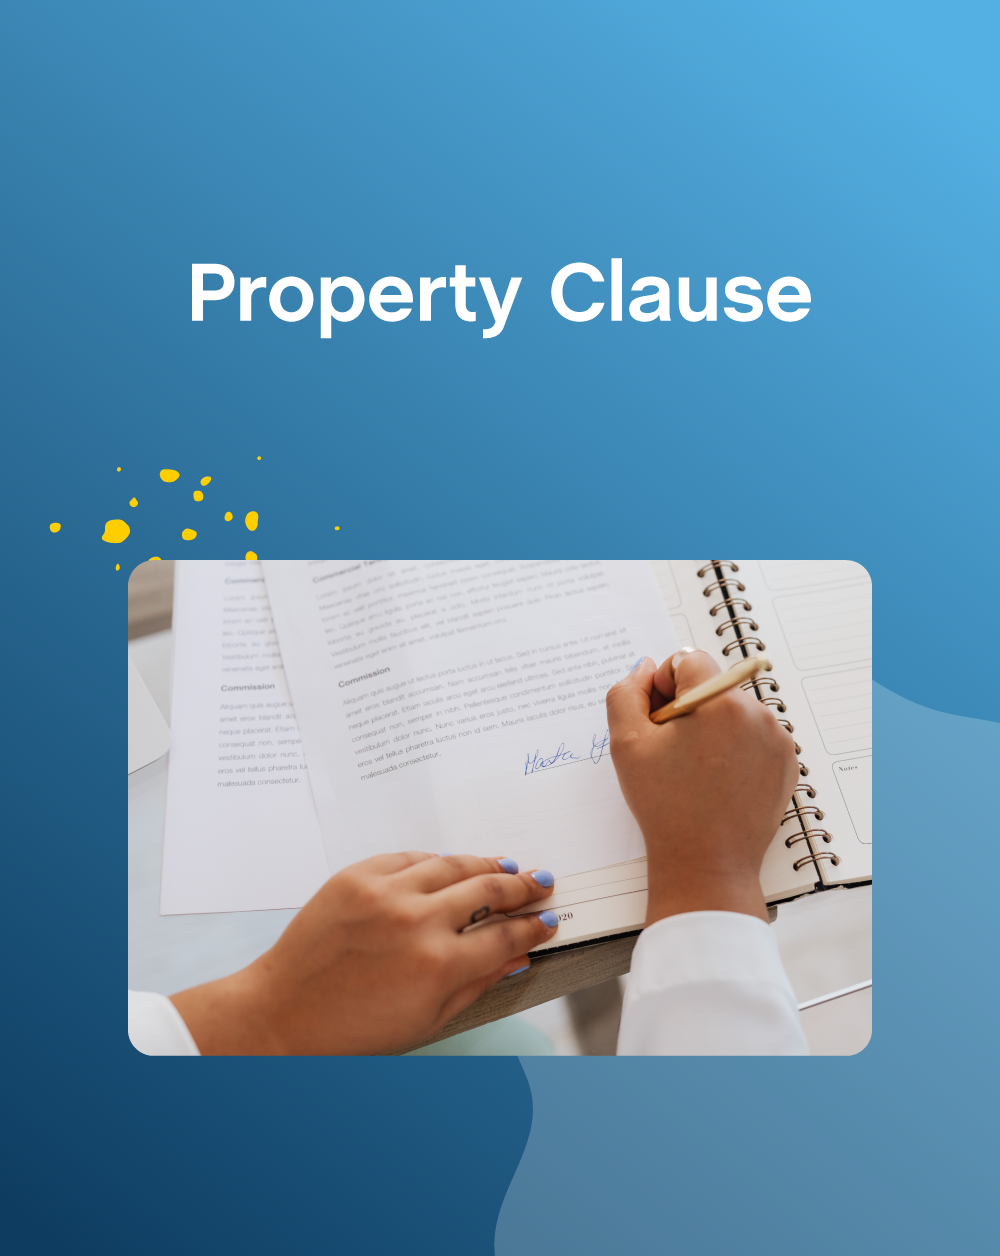 Property Release Contract Template - The Contract Shop®